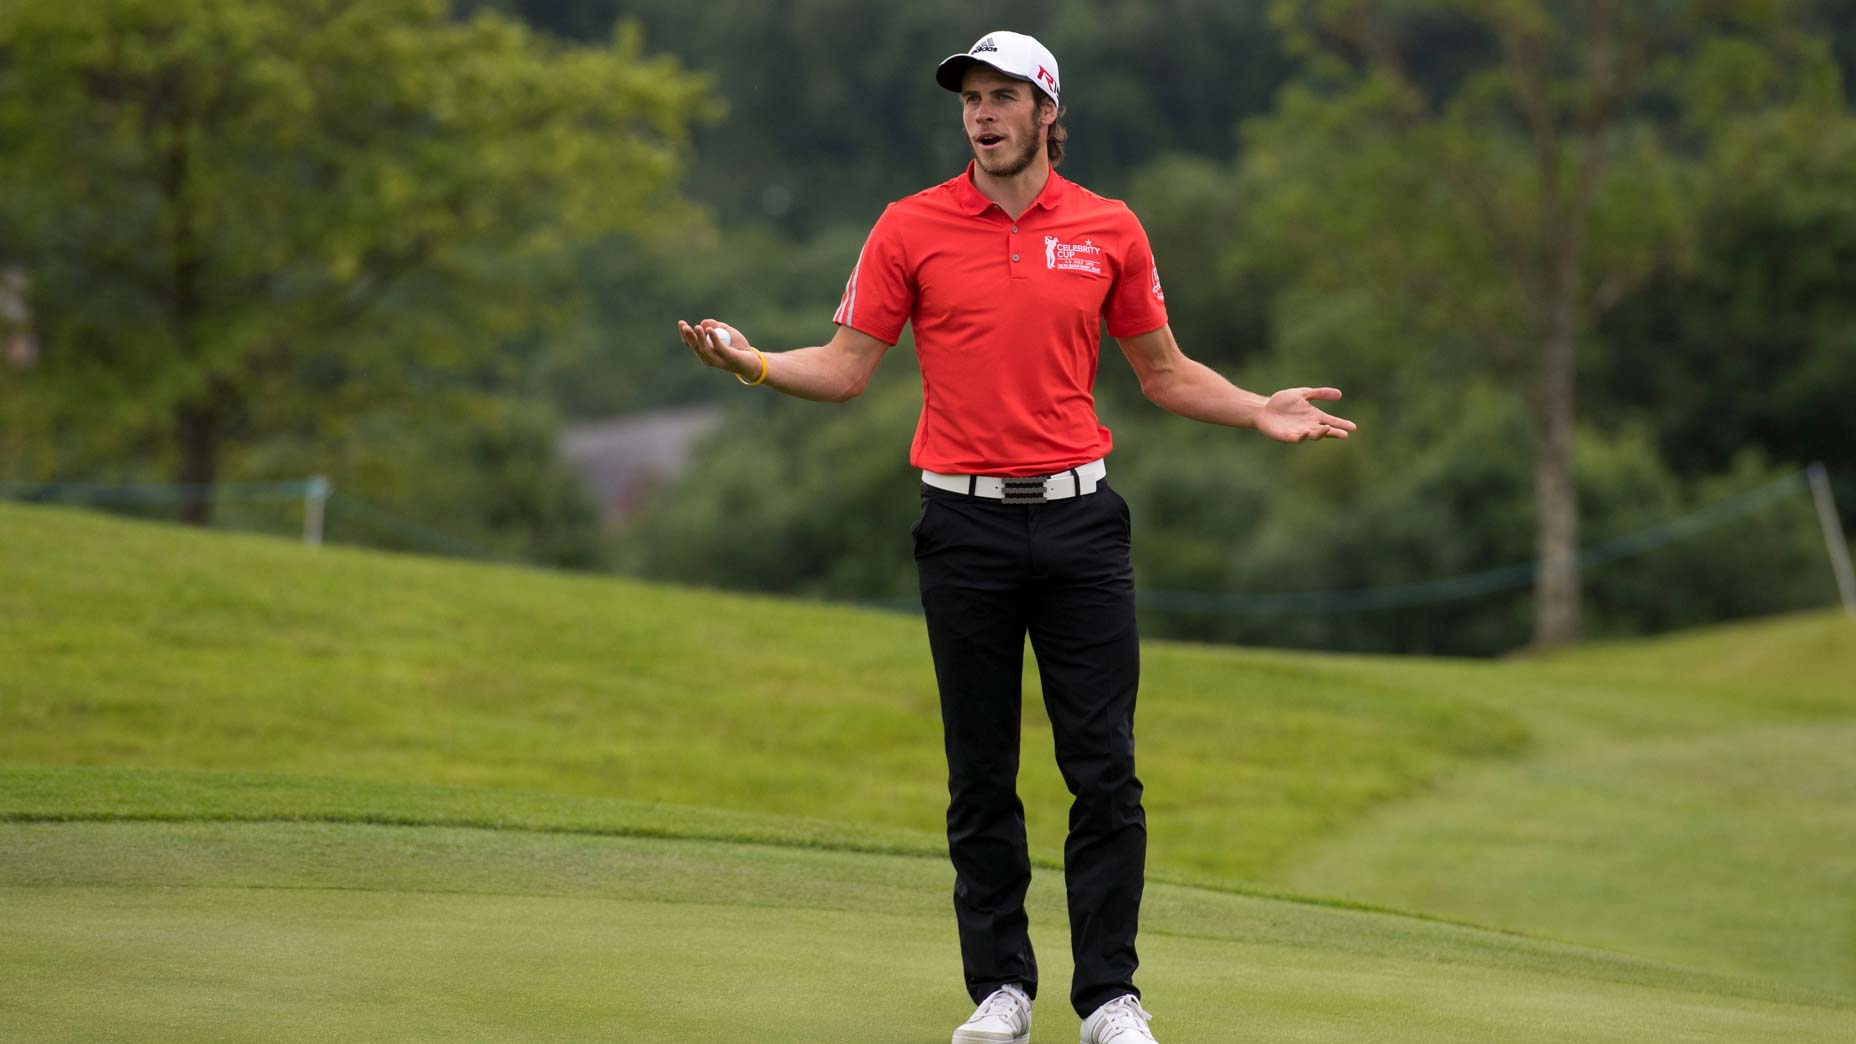 Footballer Gareth Bale gestures to the crowd during the annual Celebrity Cup golf tournament at Celtic Manor Resort on July 4, 2015 in Newport, Wales. The Celebrity Cup sees celebrities from England, Wales, Ireland and Scotland competing against each other.